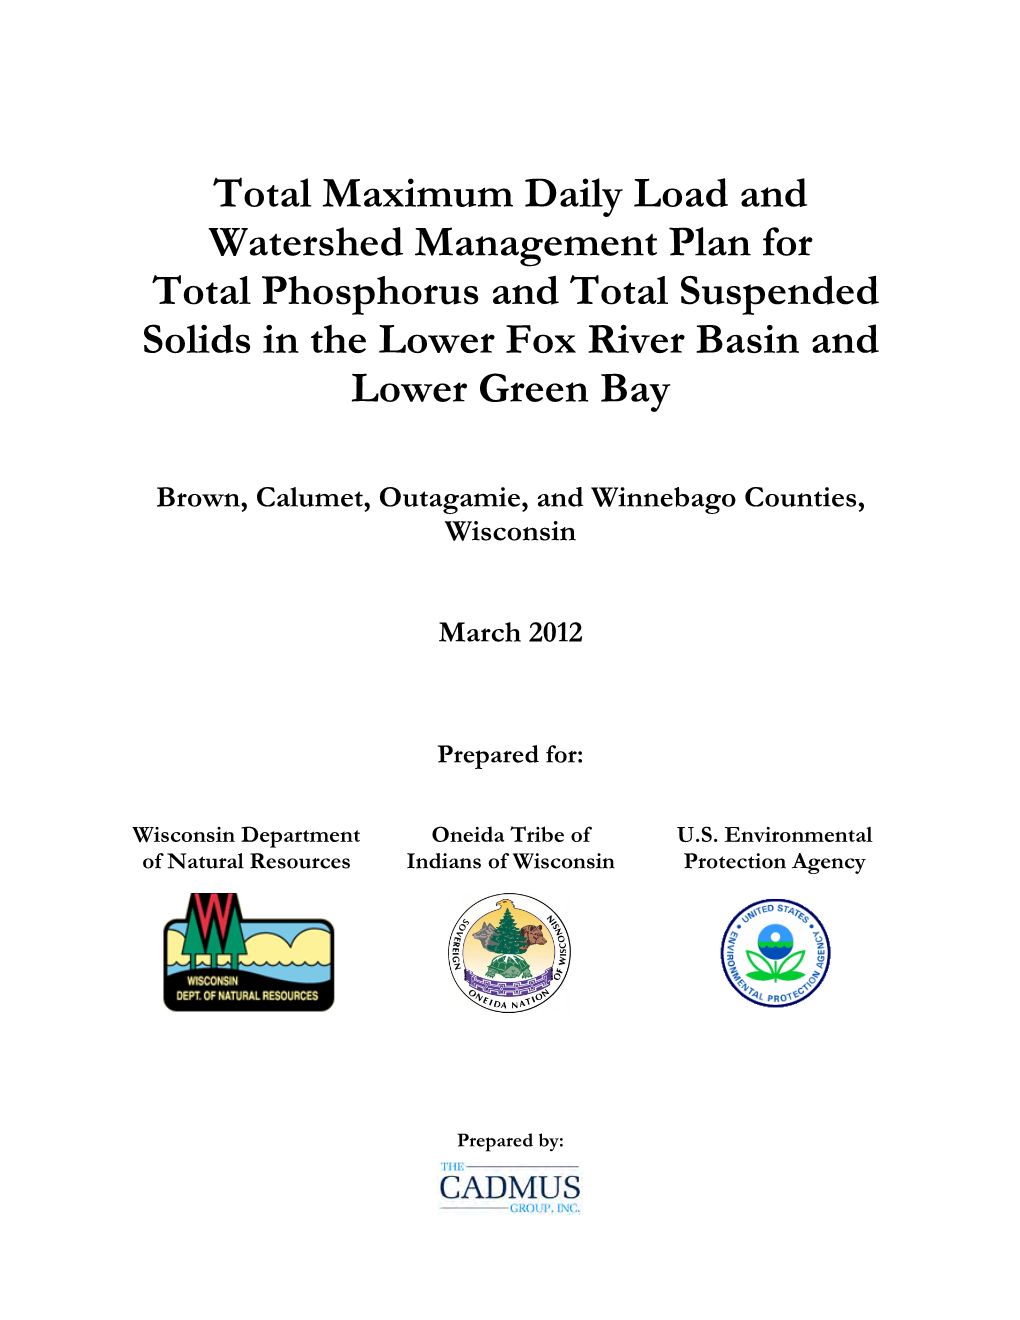 Total Maximum Daily Load and Watershed Management Plan for Total Phosphorus and Total Suspended Solids in the Lower Fox River Basin and Lower Green Bay